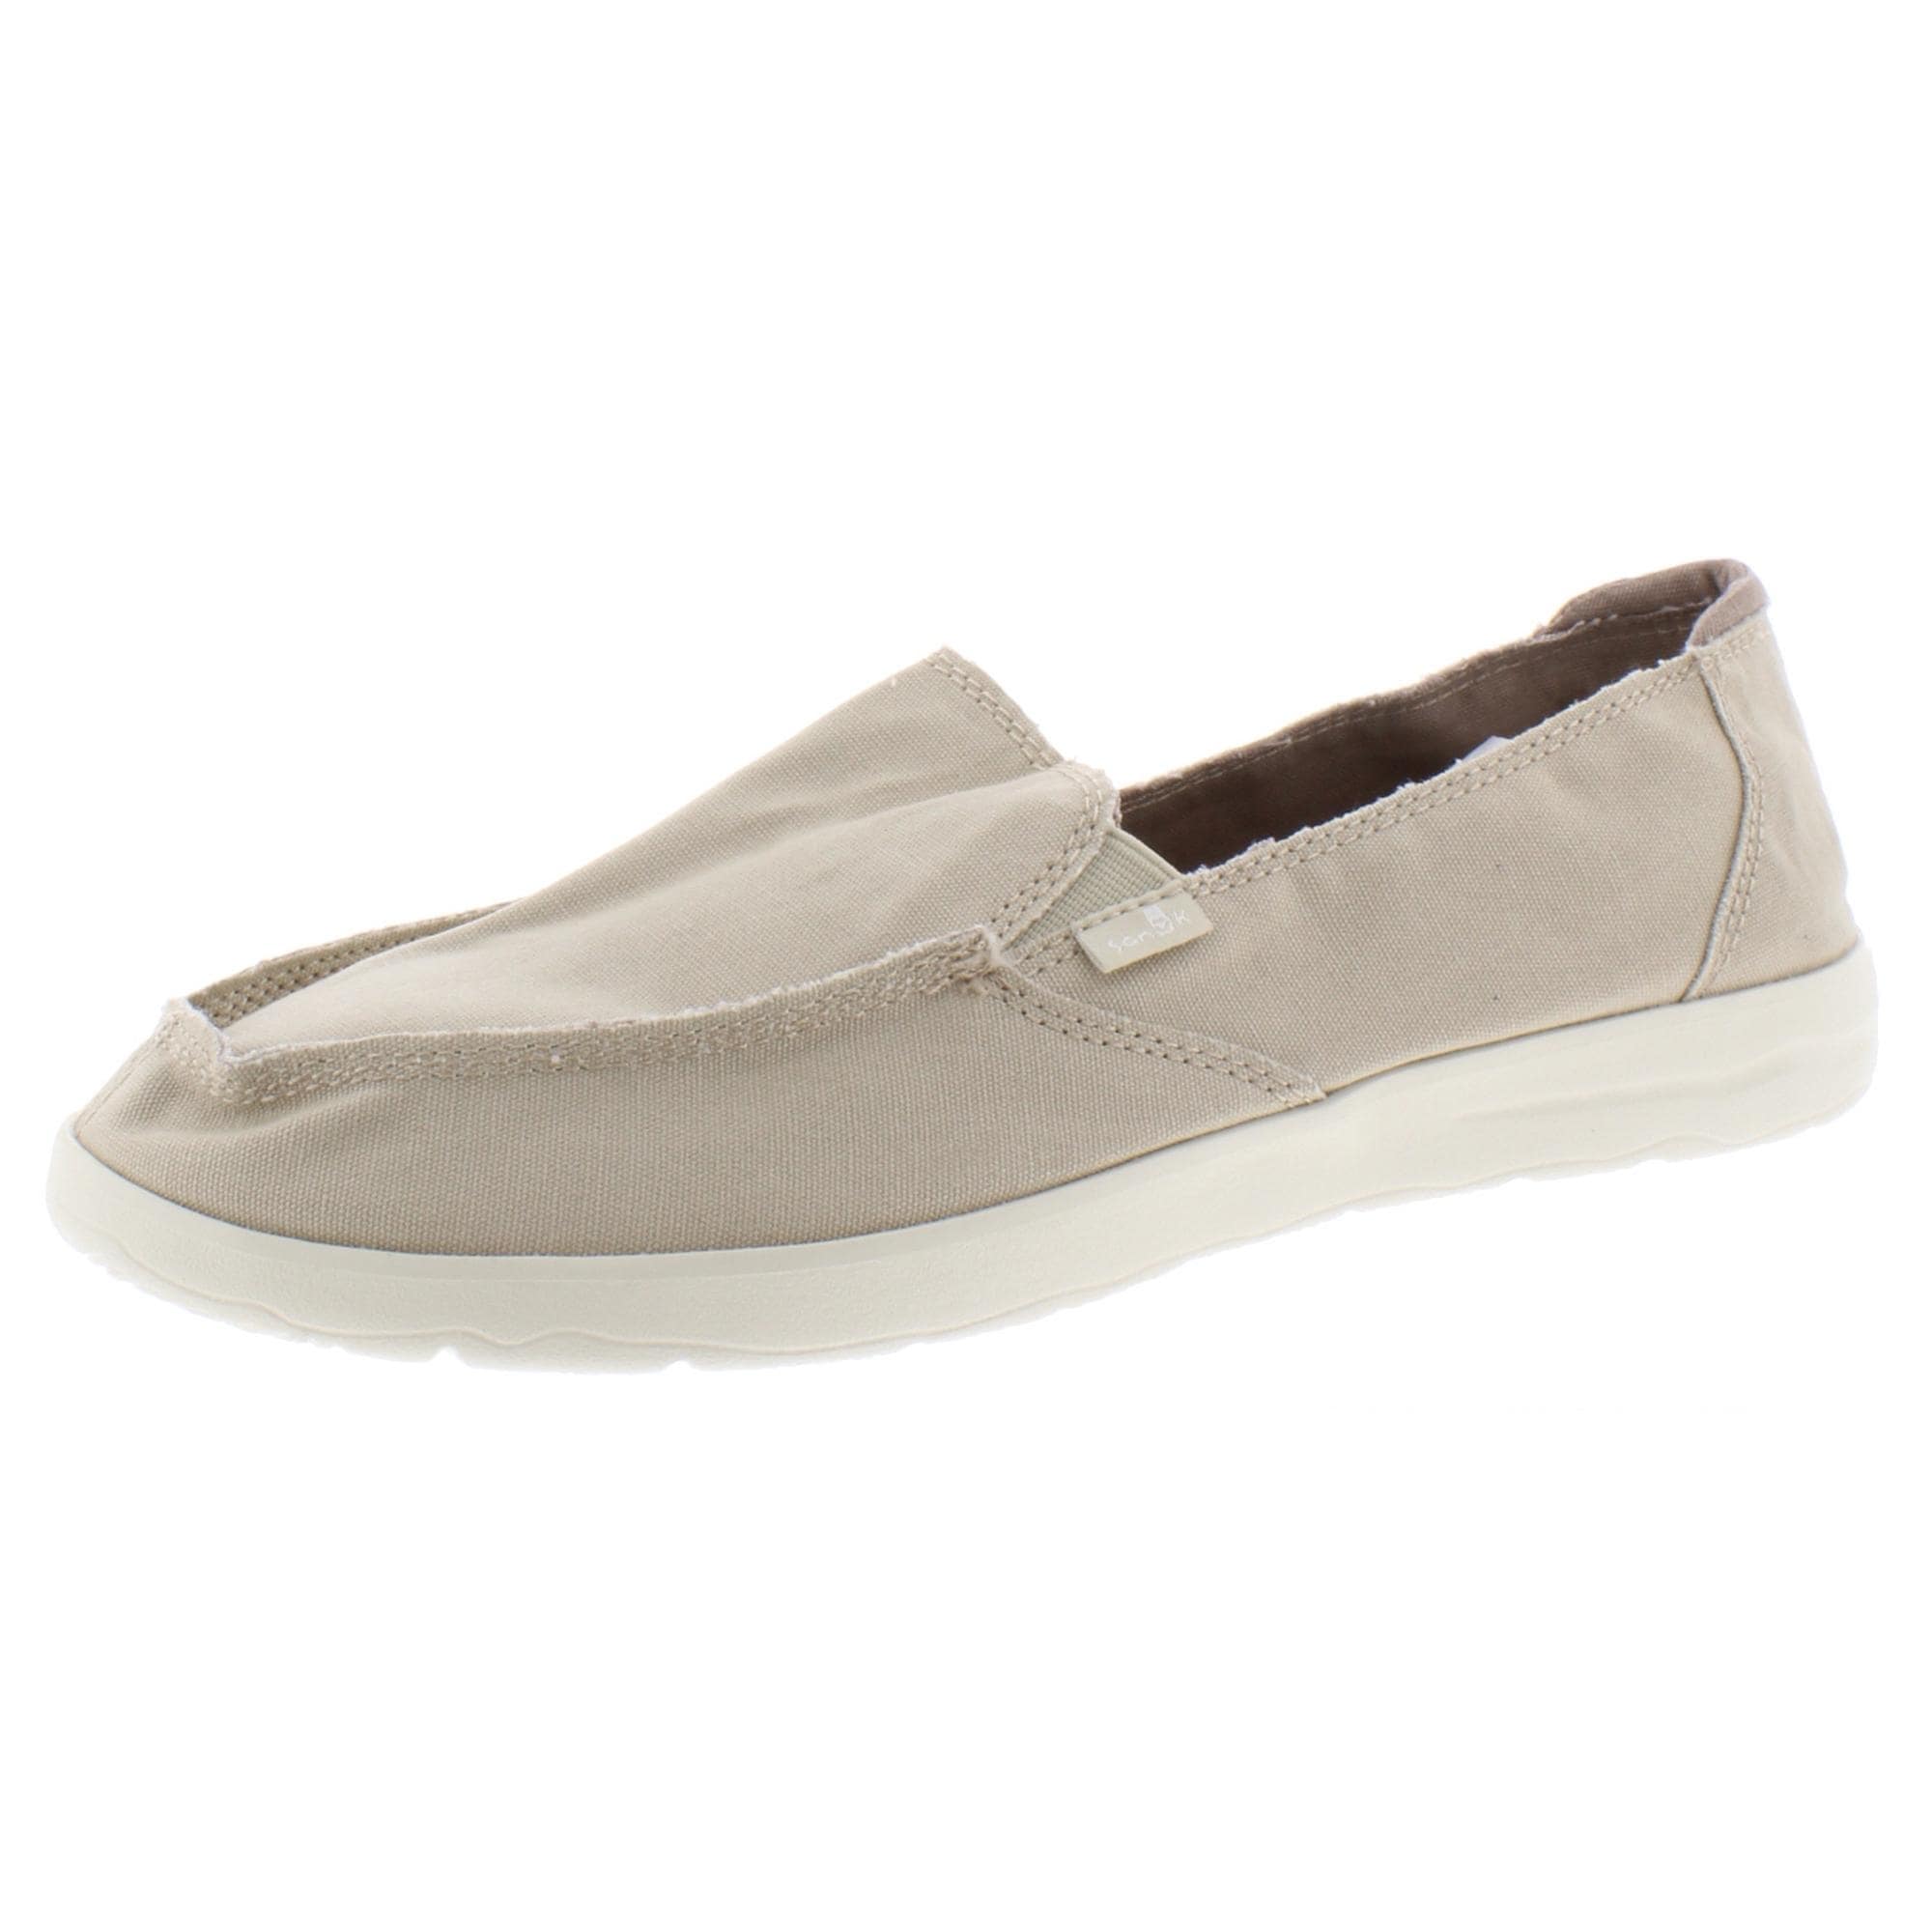 sneakers slip on donna